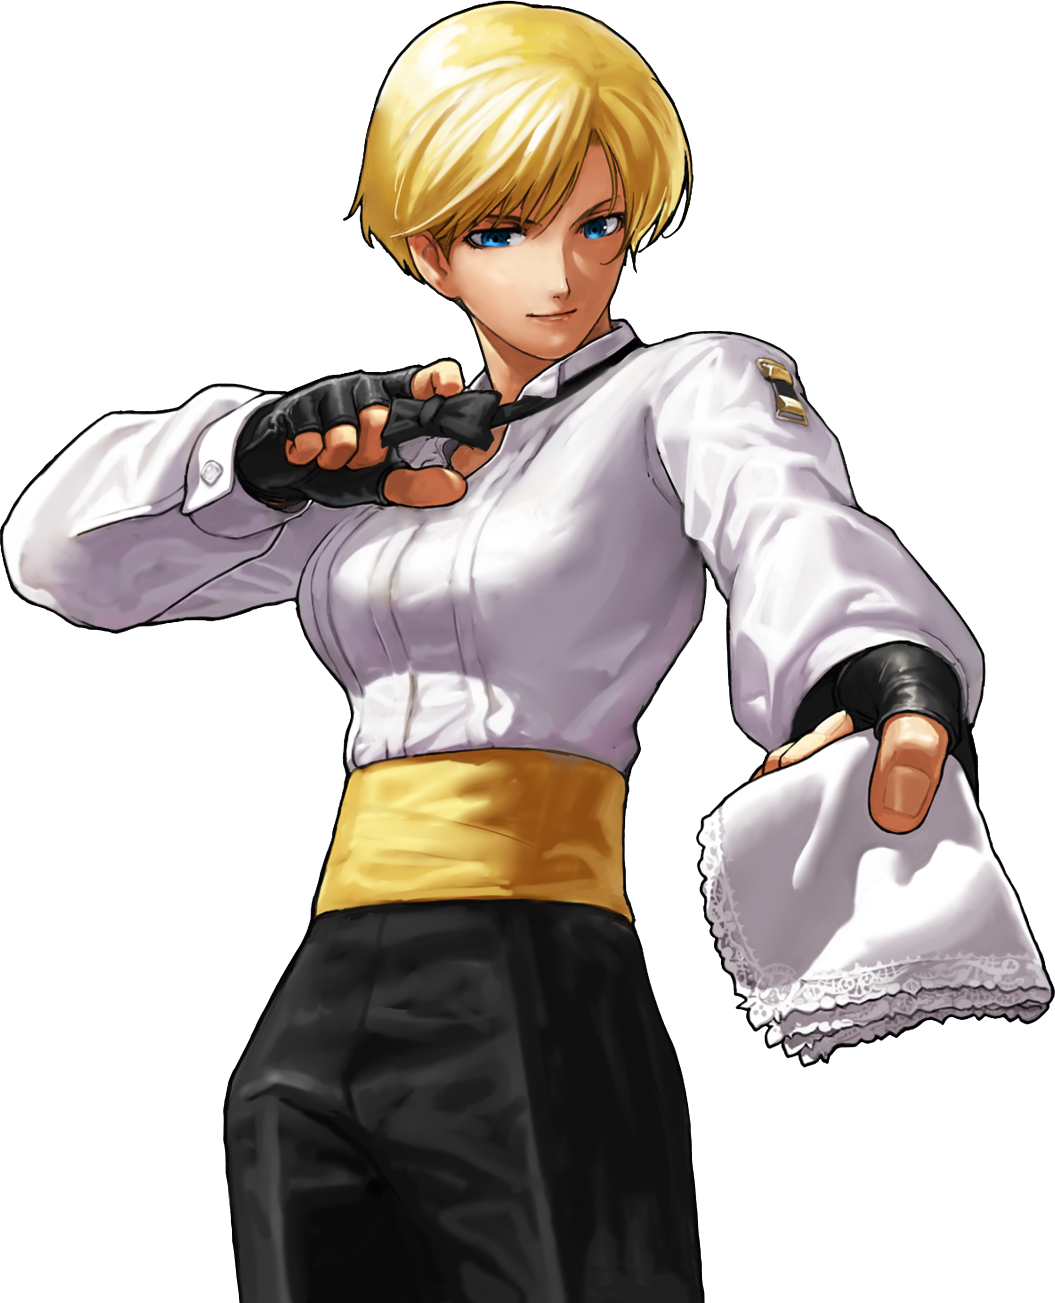 KOF 99  King of fighters, Art of fighting, Fighter